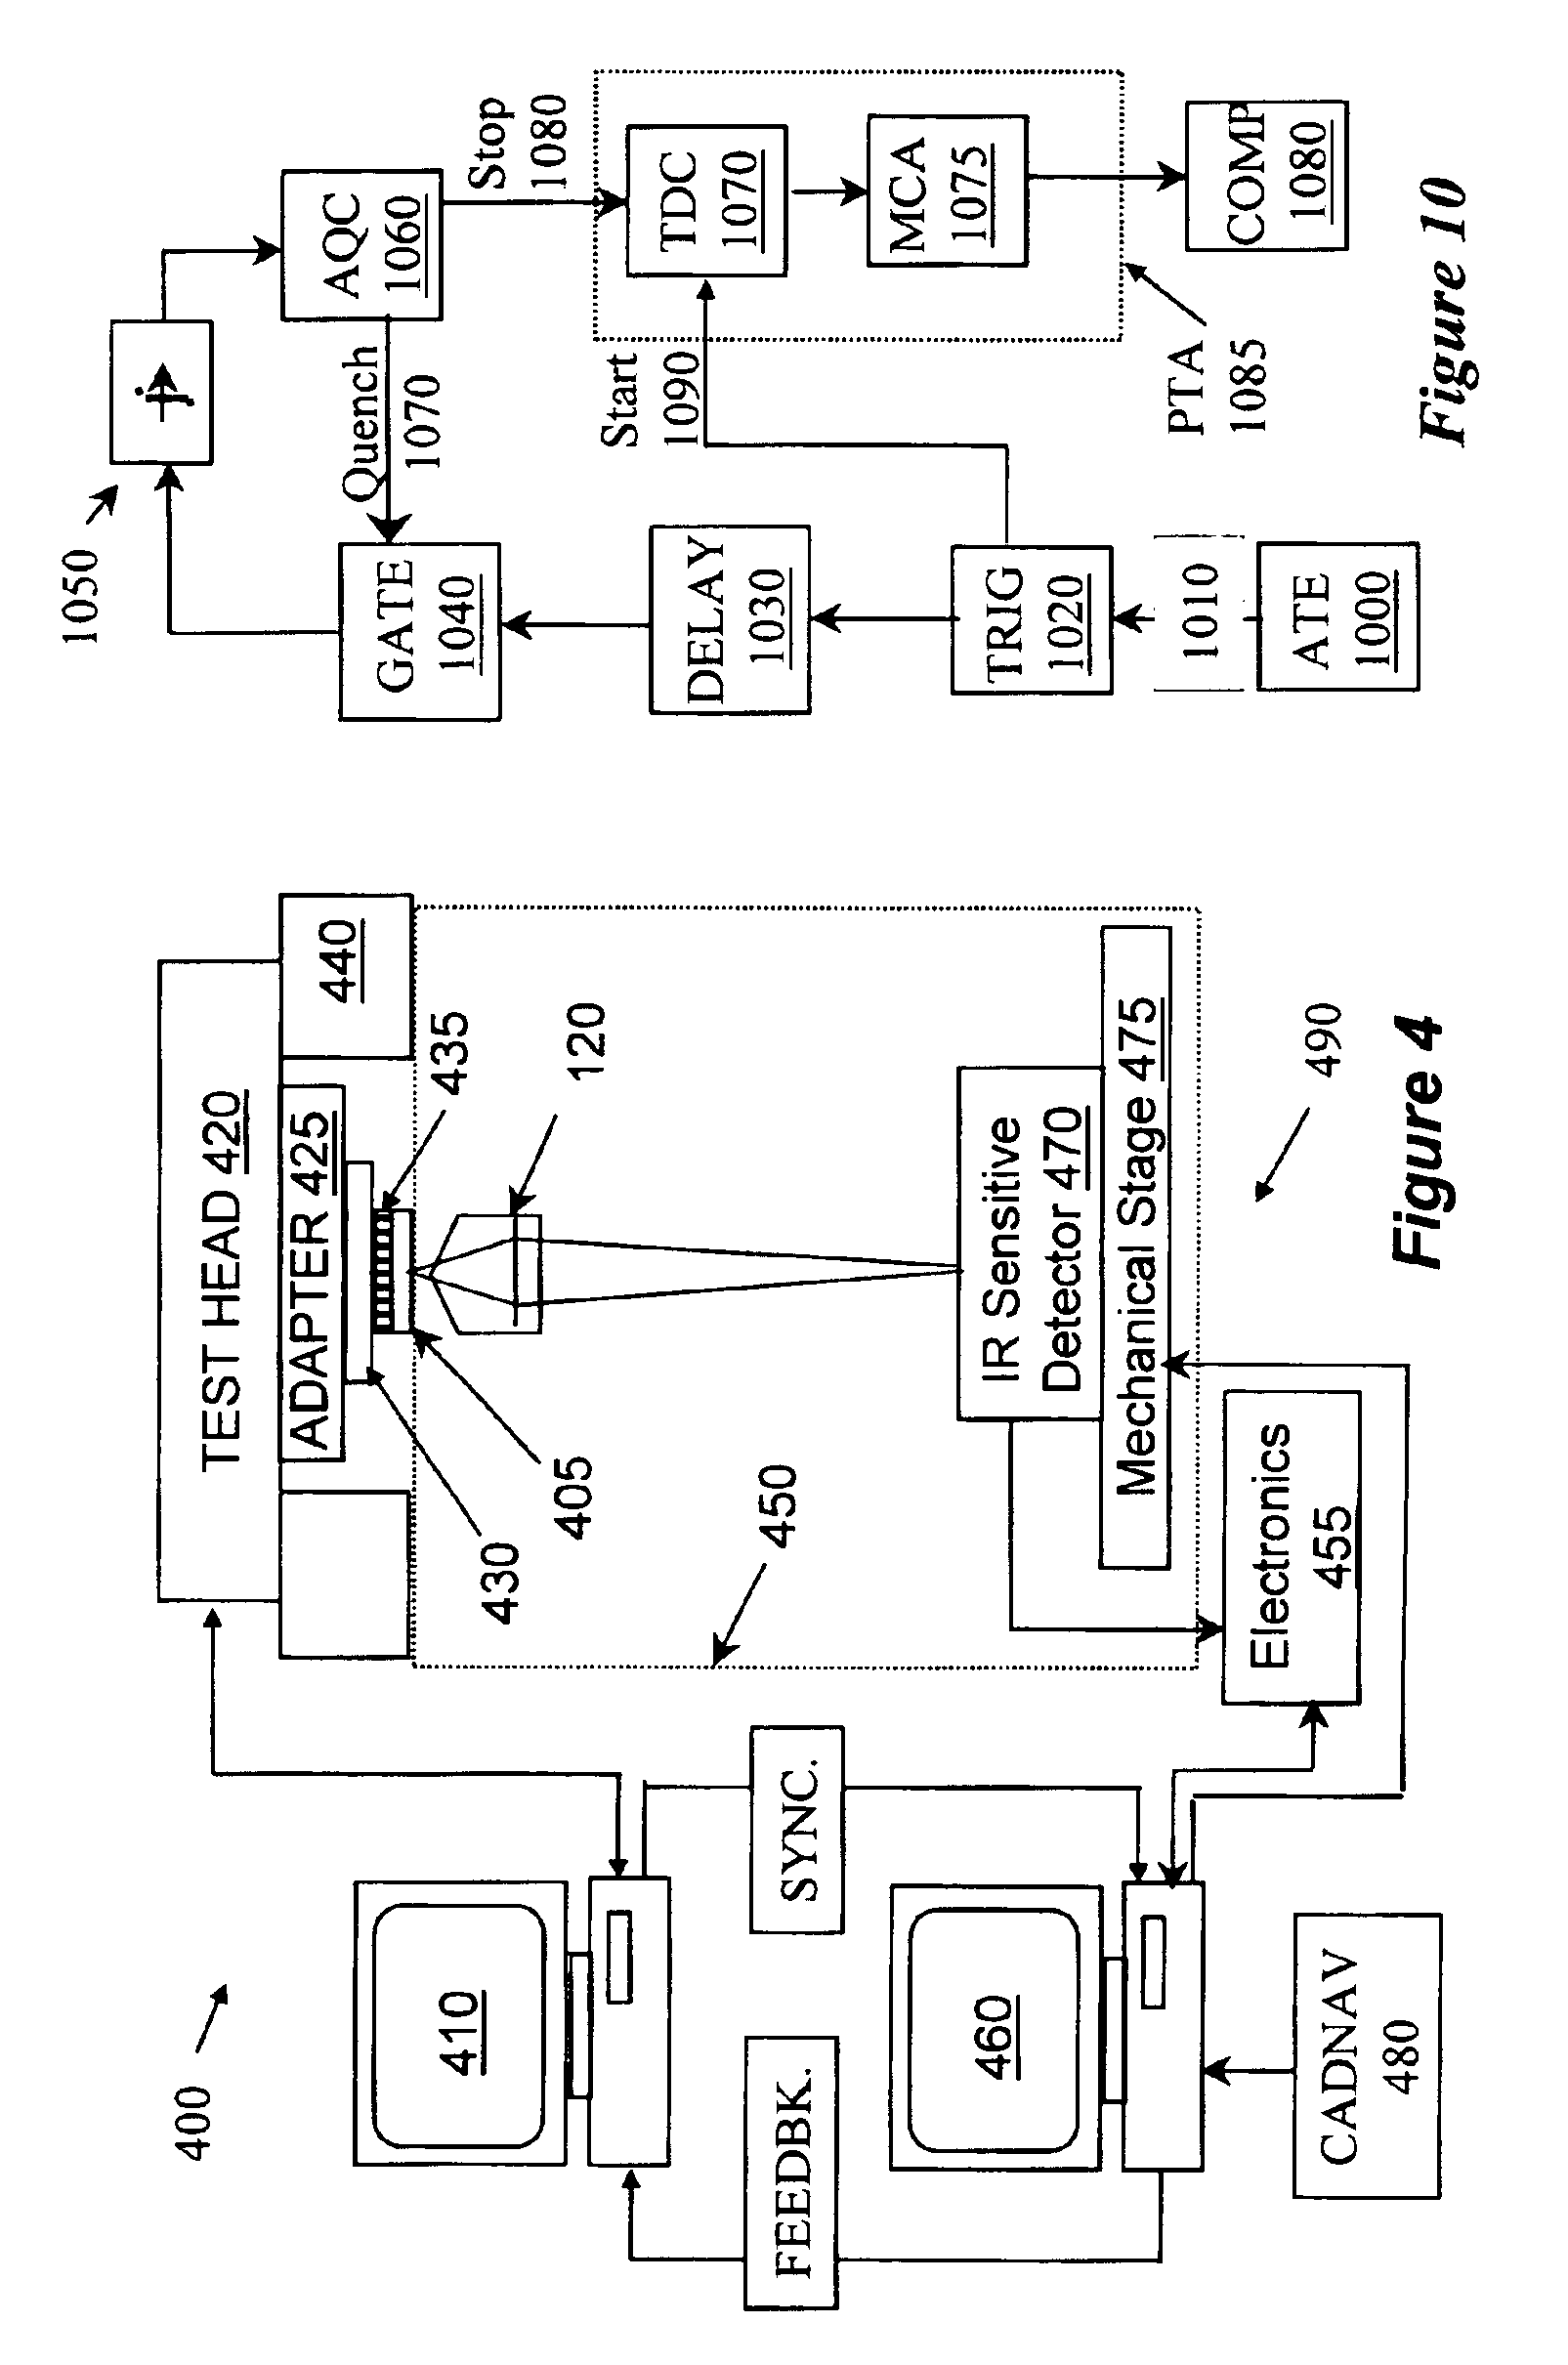 System and method for calibration of testing equipment using device photoemission